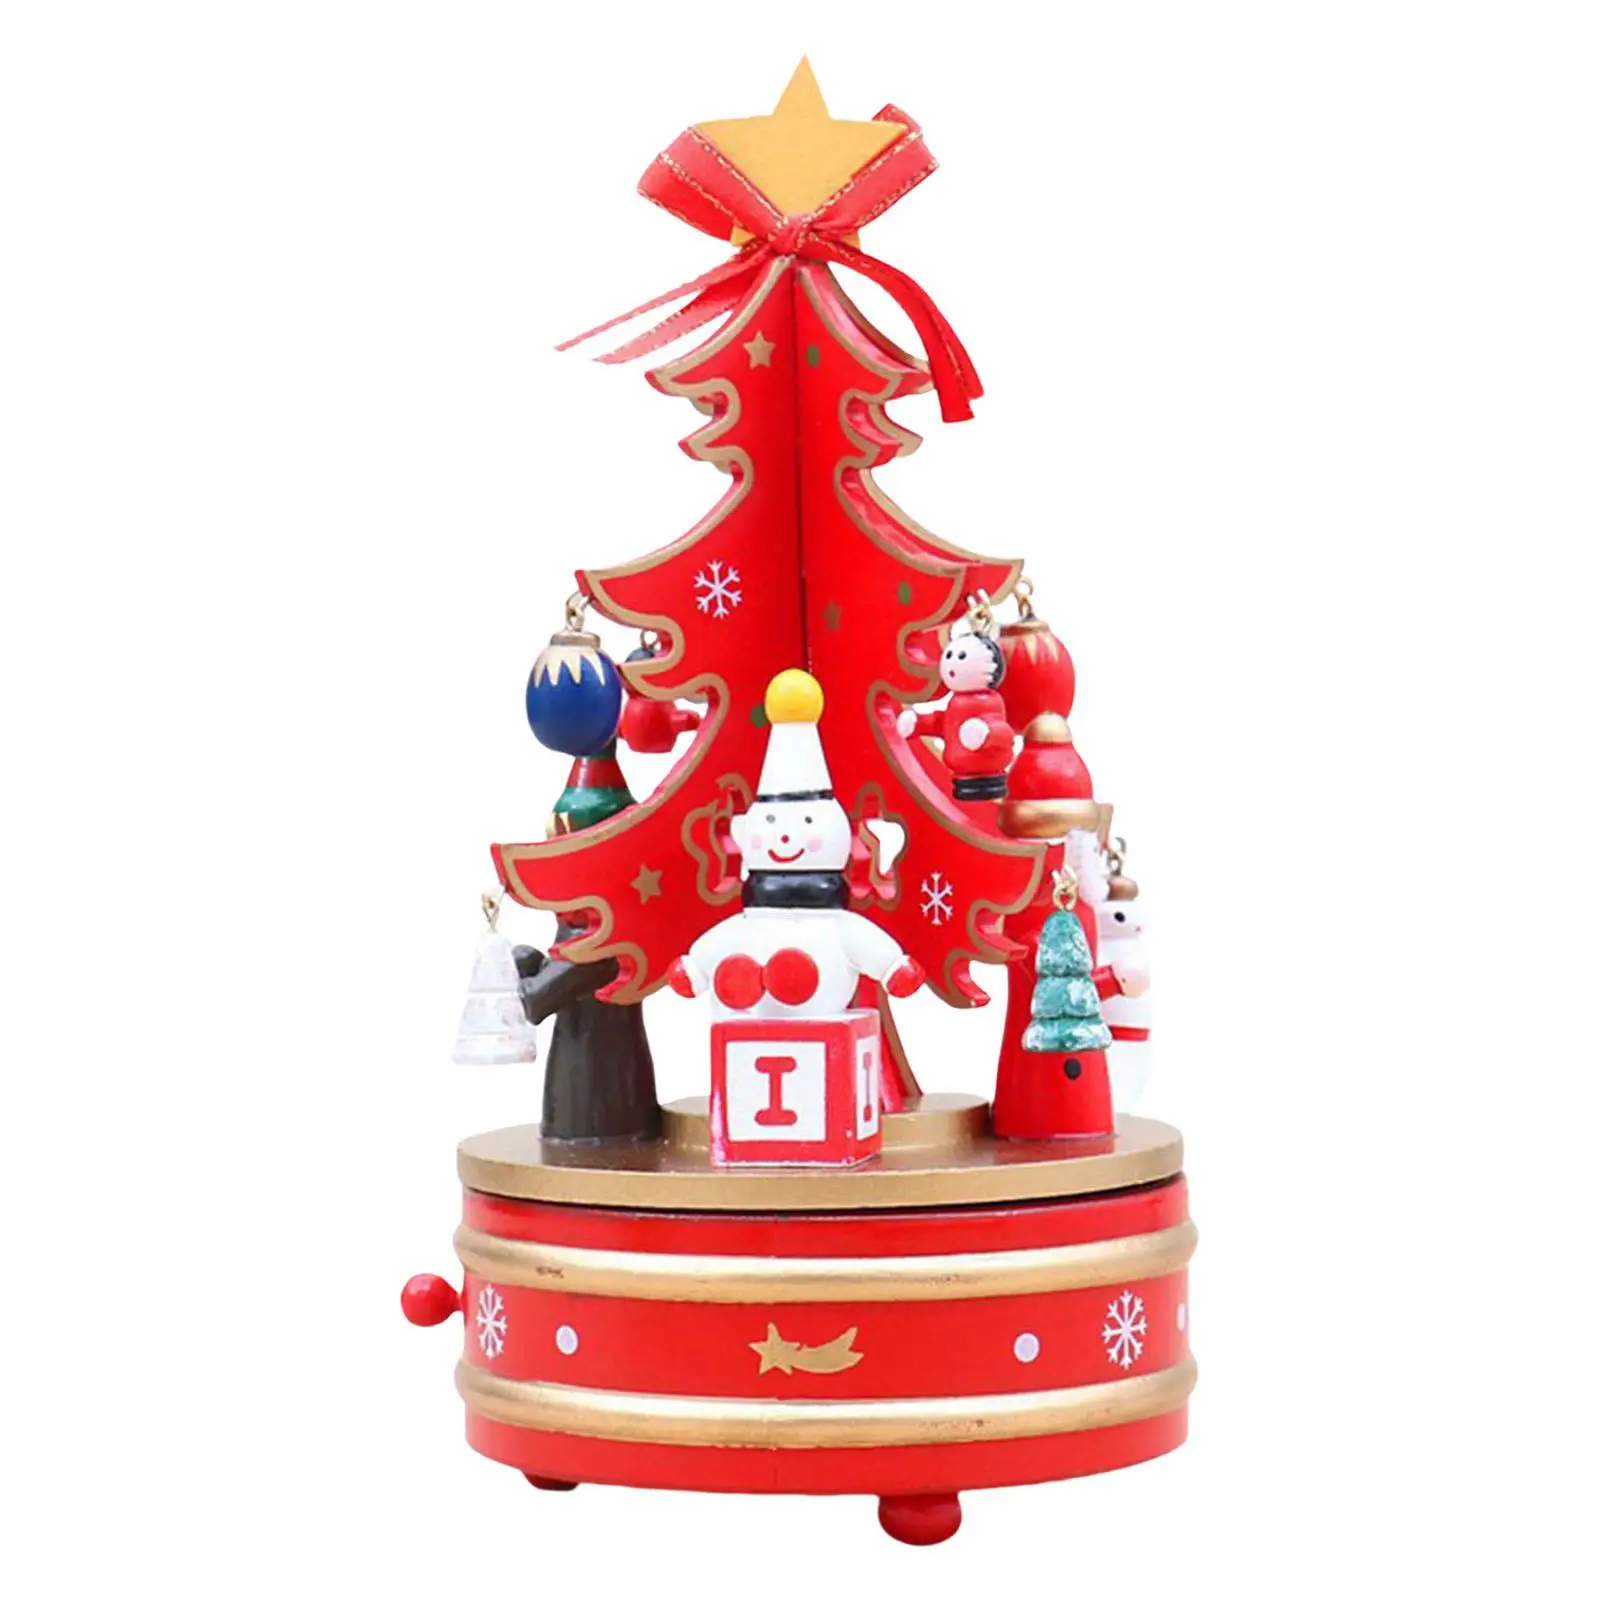 Portable Music Box Rotatable Wooden Musical Box Carousel Decoration Toy for Desktop Party Home Ornament Kids Gift